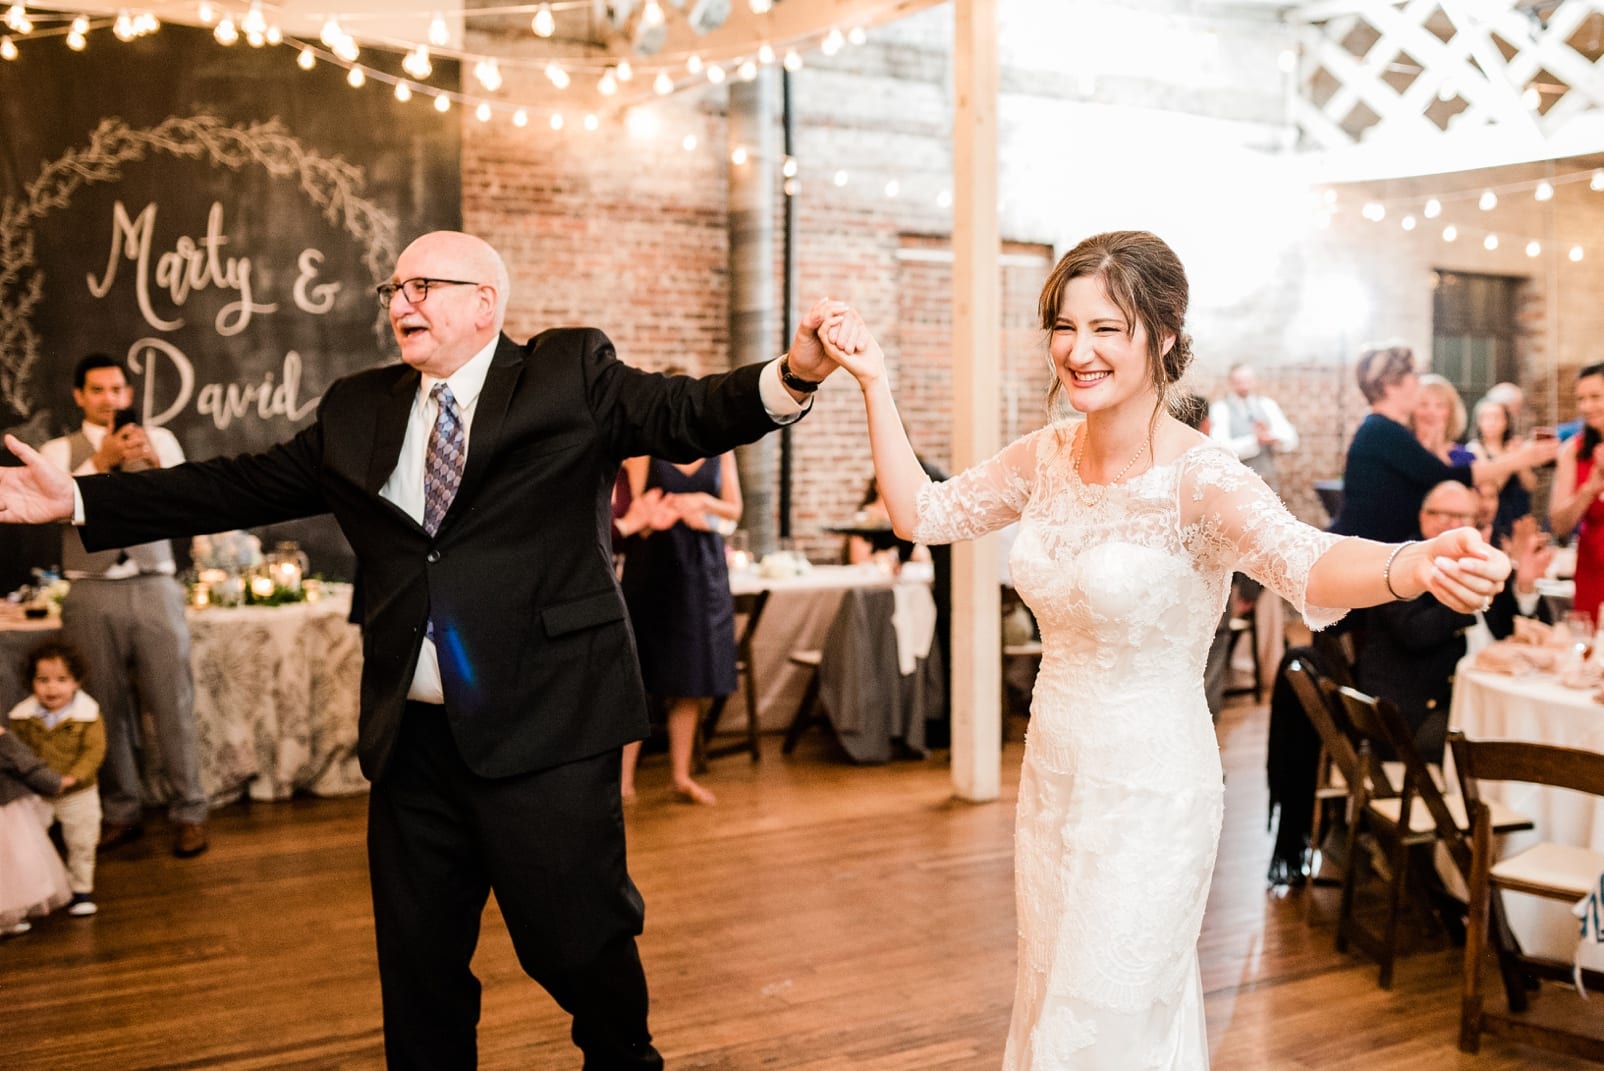 Stockroom at 230 bride dancing with her father photo